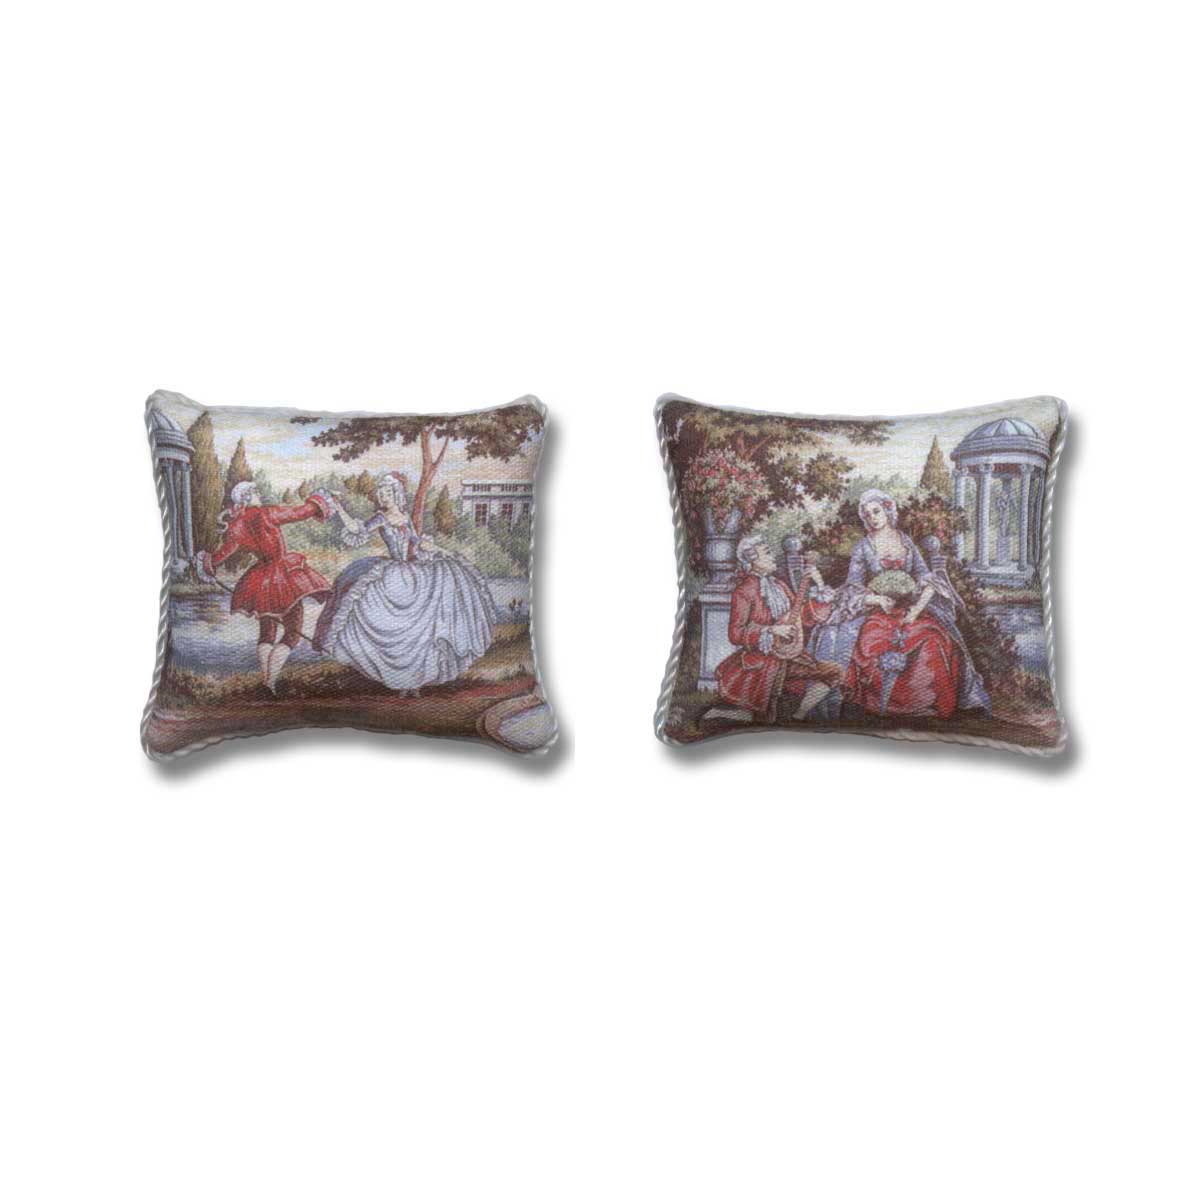 Two Matching Dollhouse Miniature Pillows with 18th century couples in garden scene.  One pillow with dancing couple and the other with man on bended knee serenading woman.